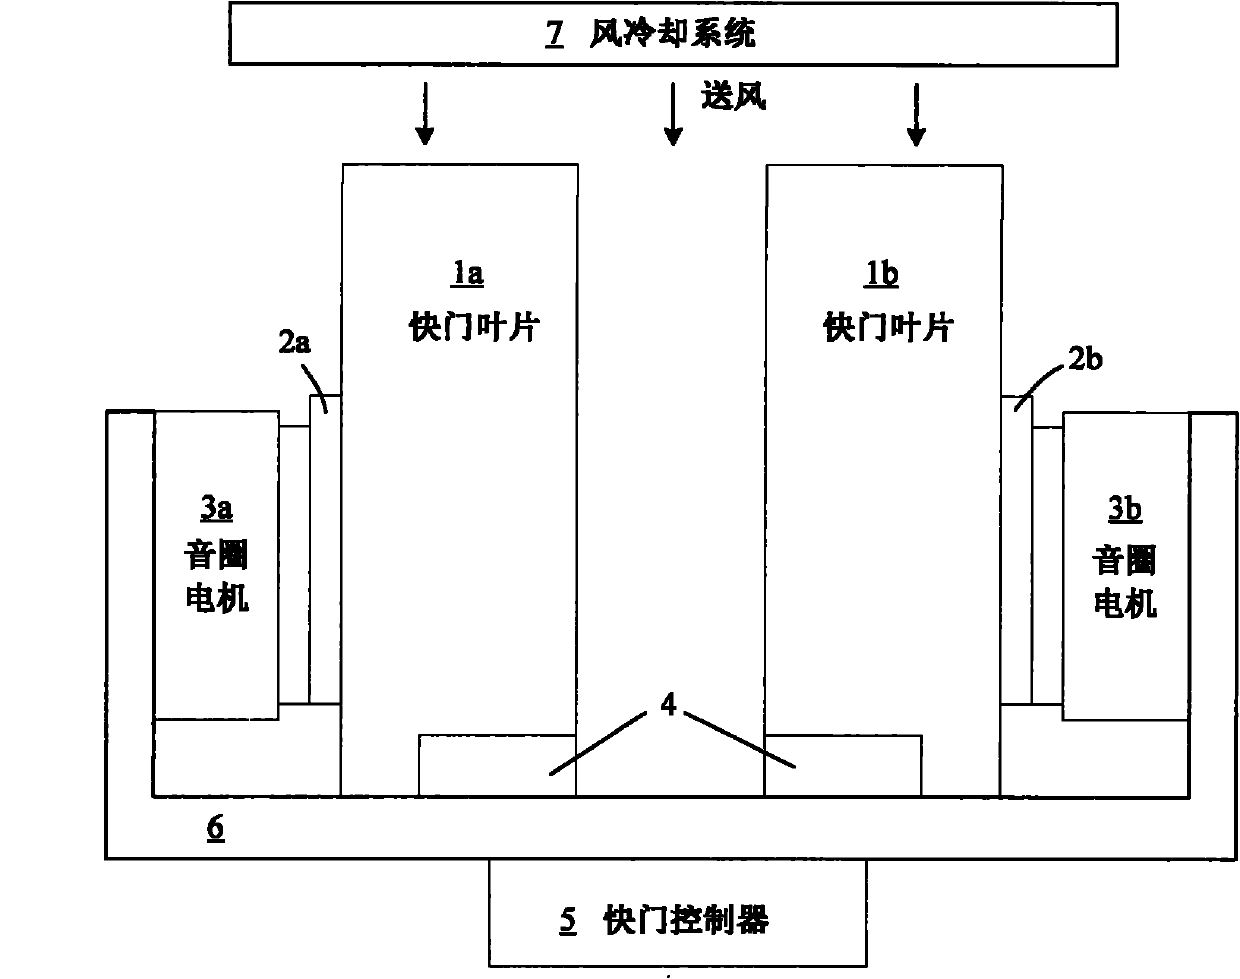 Shutter device for exposure subsystem of photoetching machine